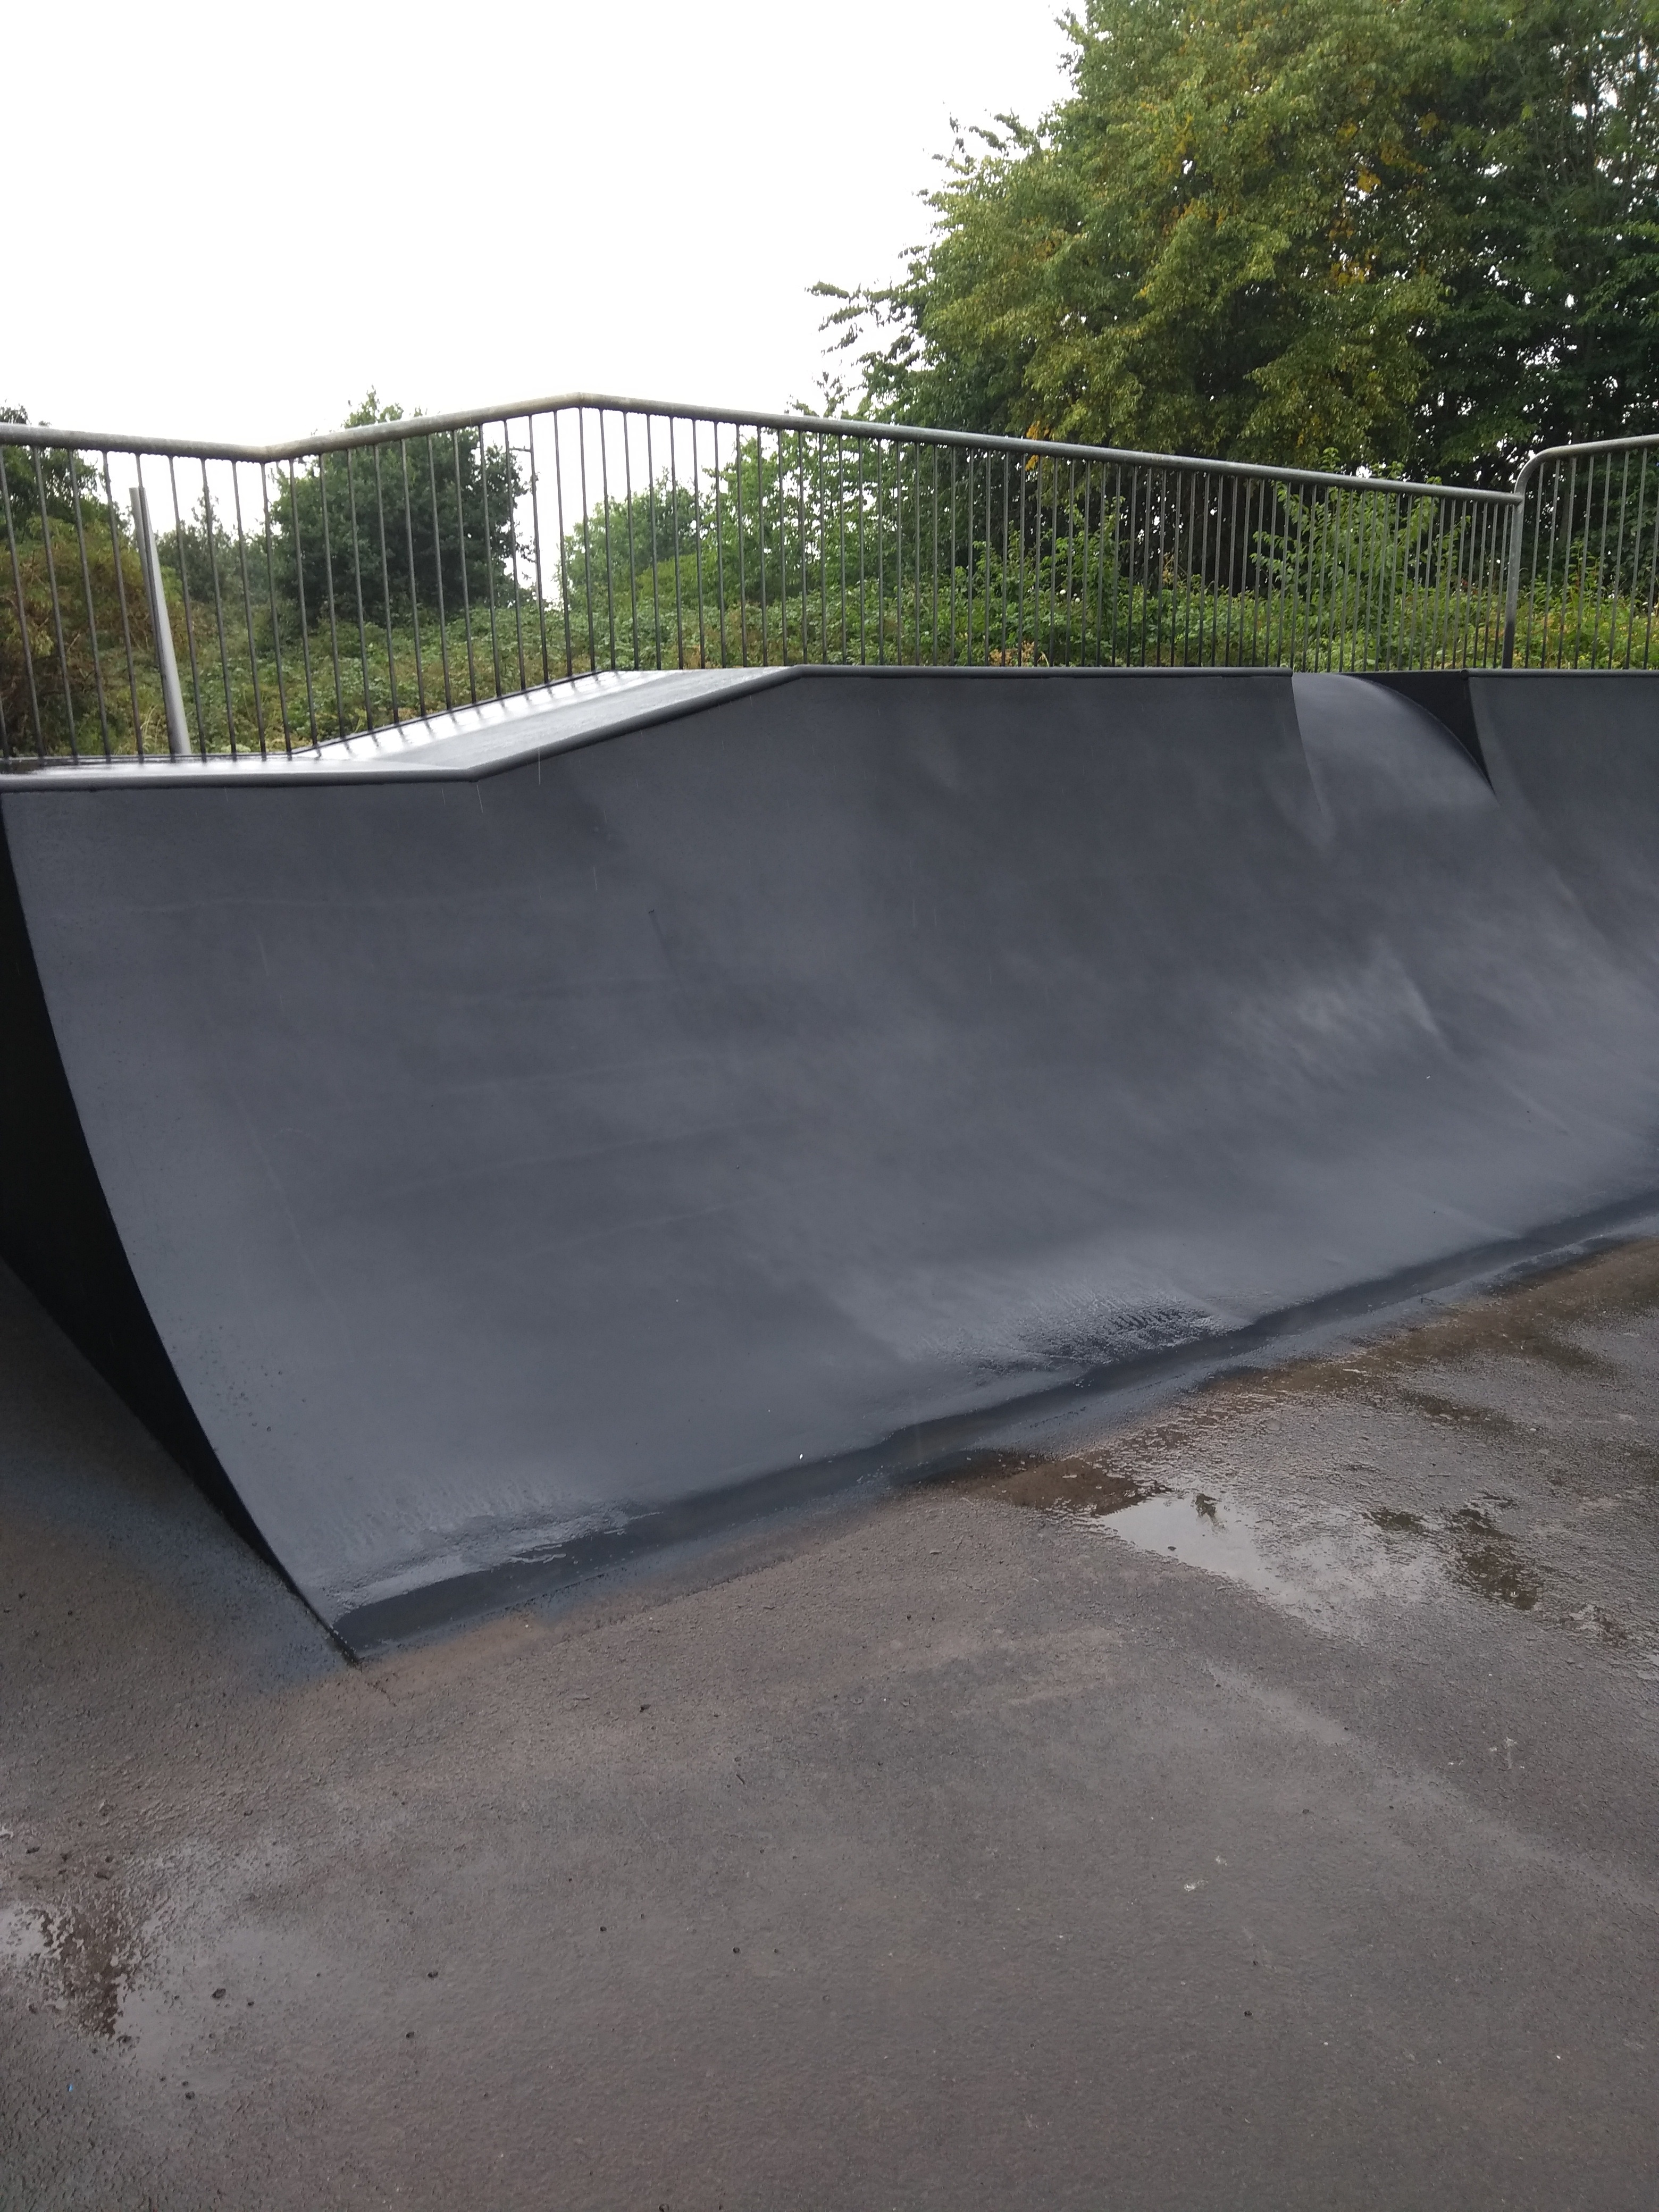 the view of the roll-in and Quarterpipes at the other end of the skate park